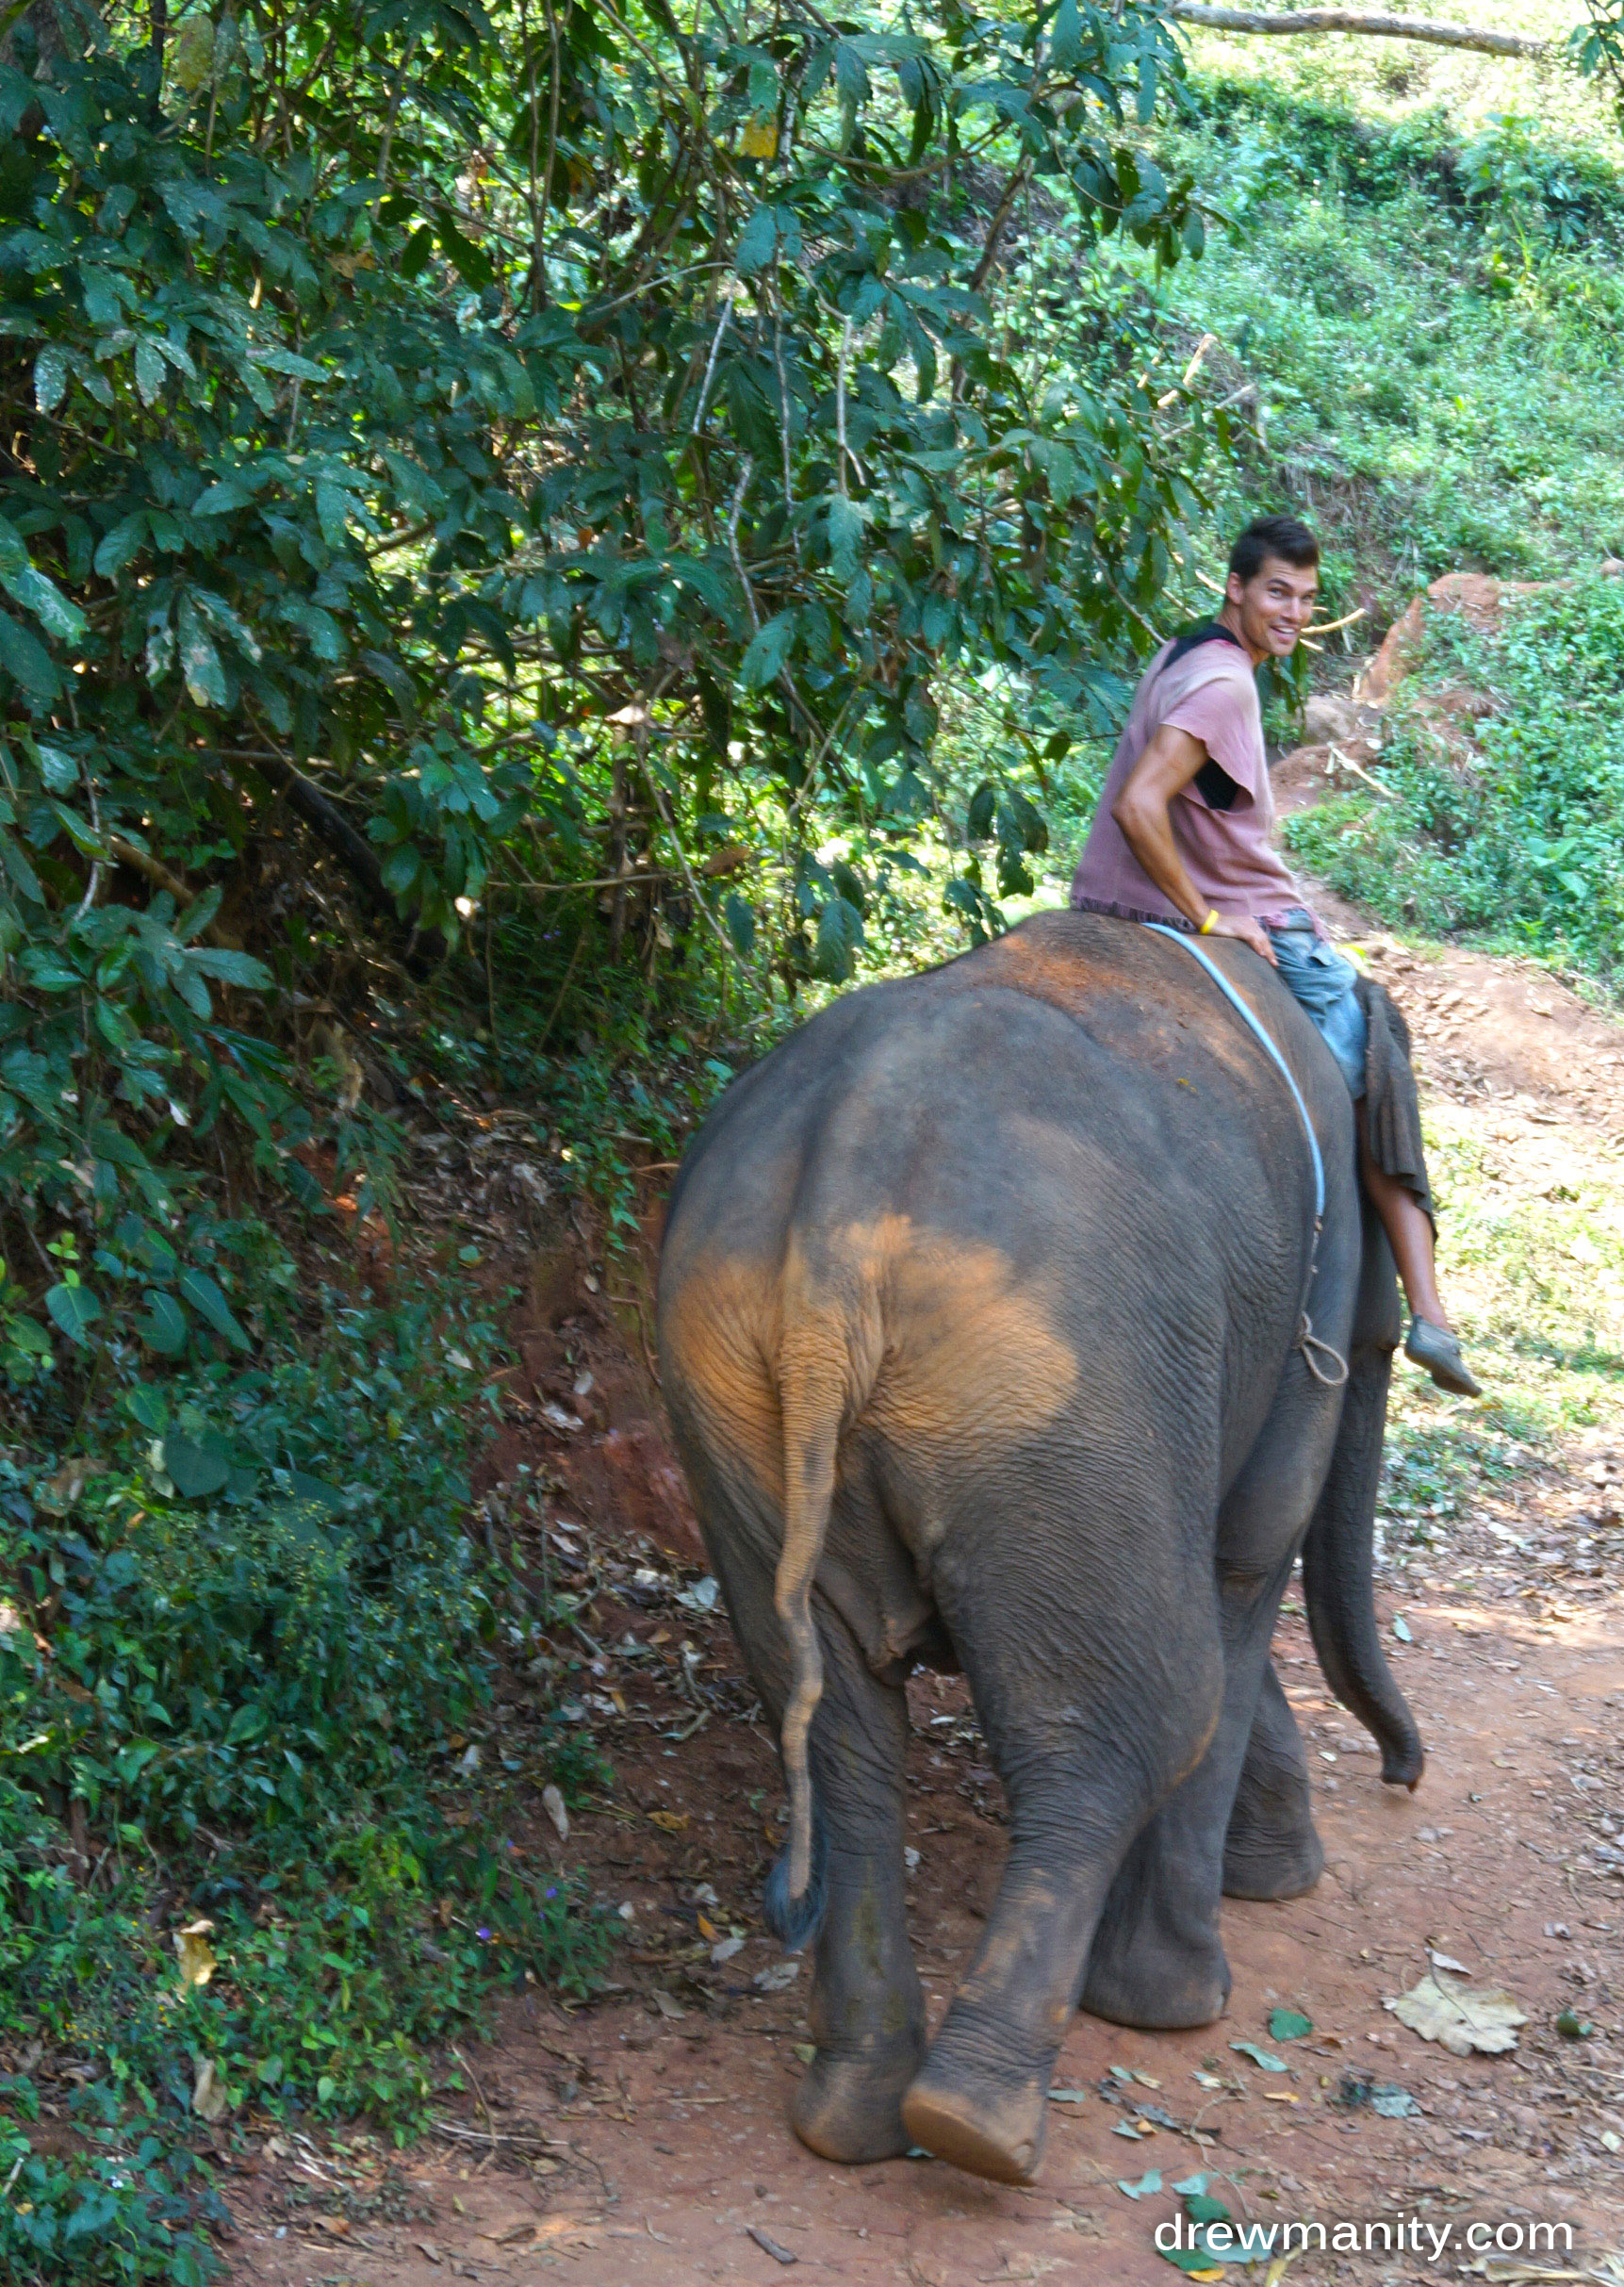 riding the elephant down hill